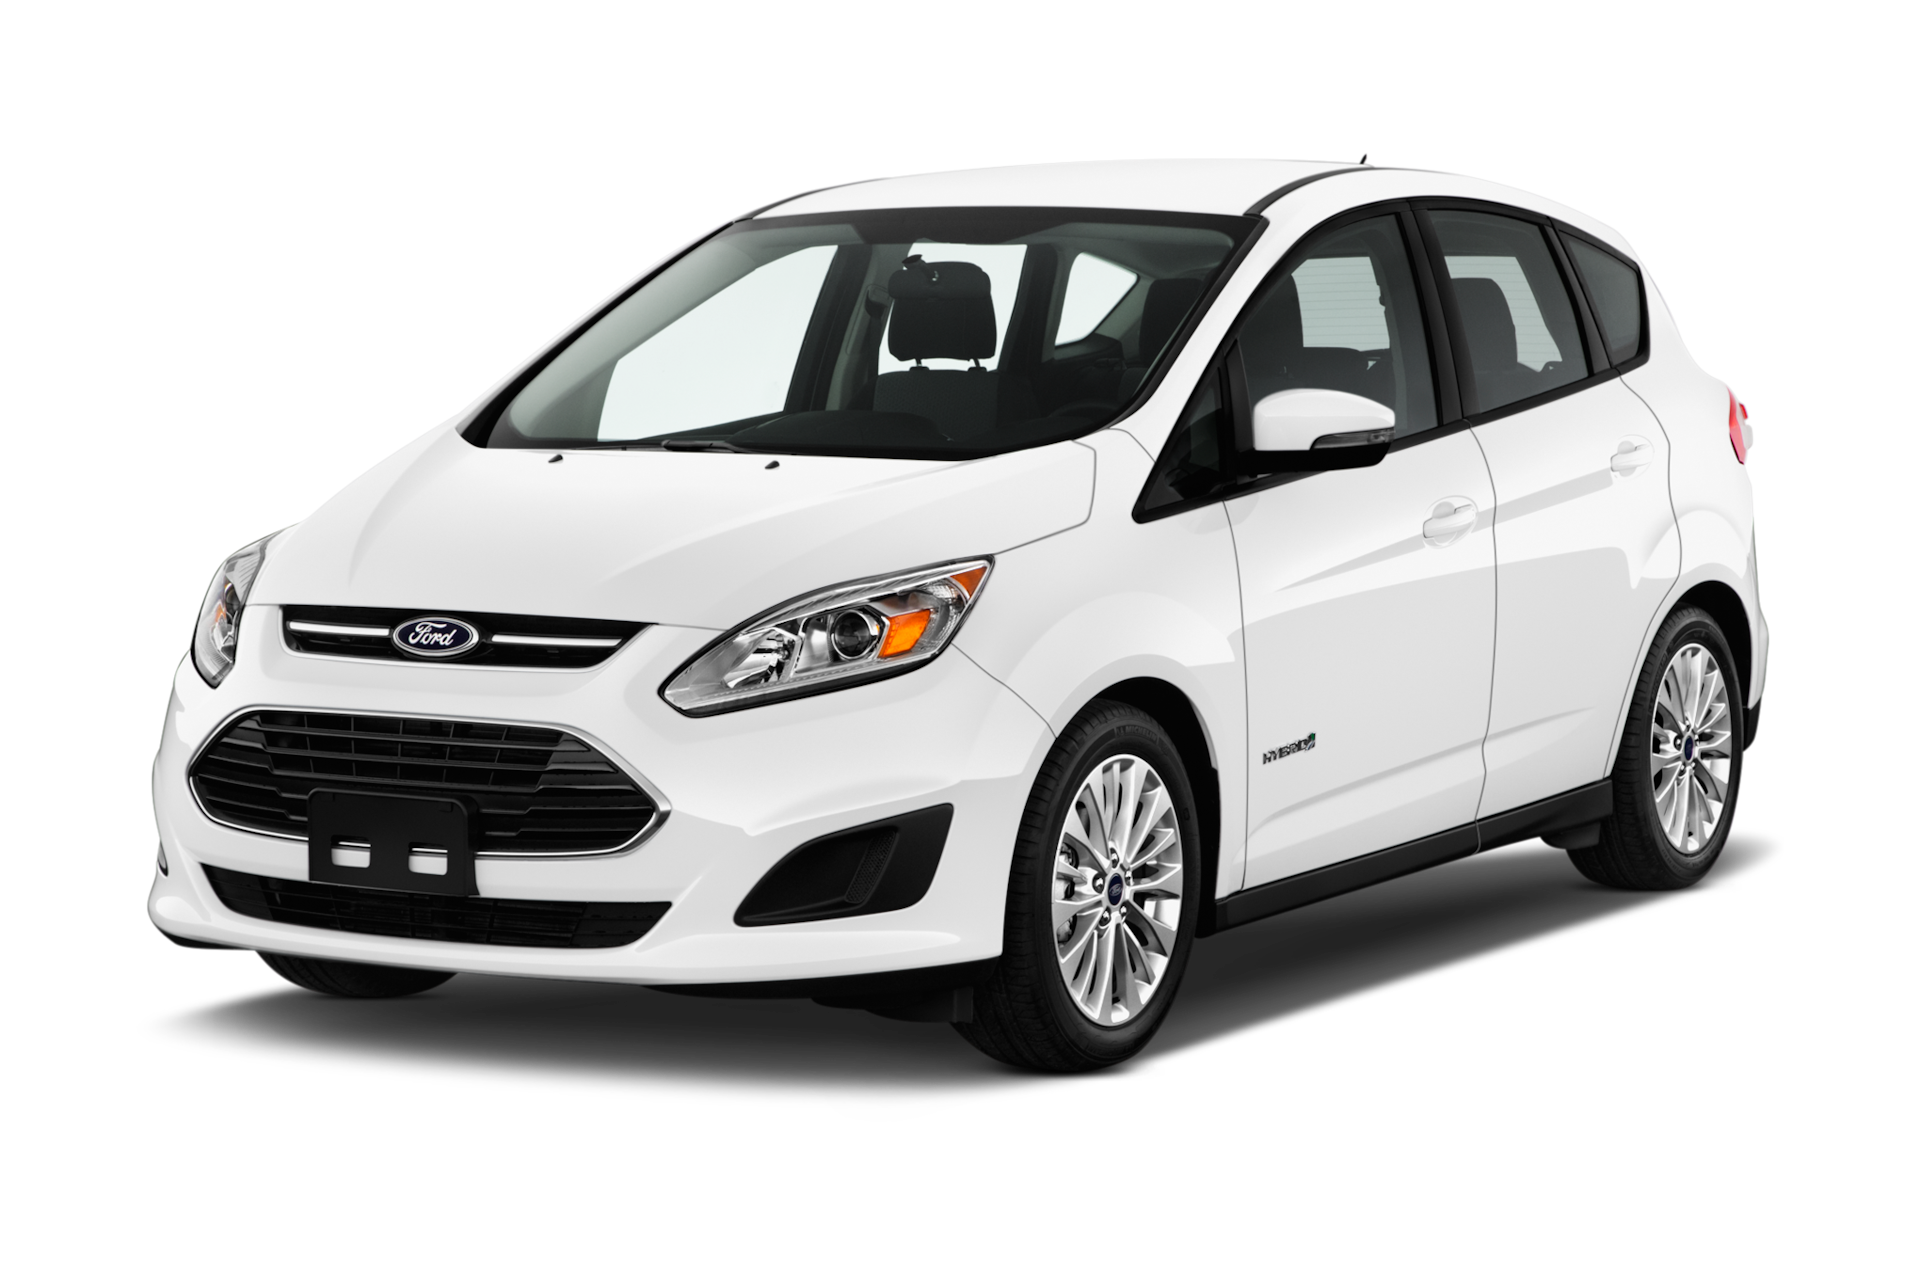 2017 Ford C-MAX Prices, Reviews, and Photos - MotorTrend